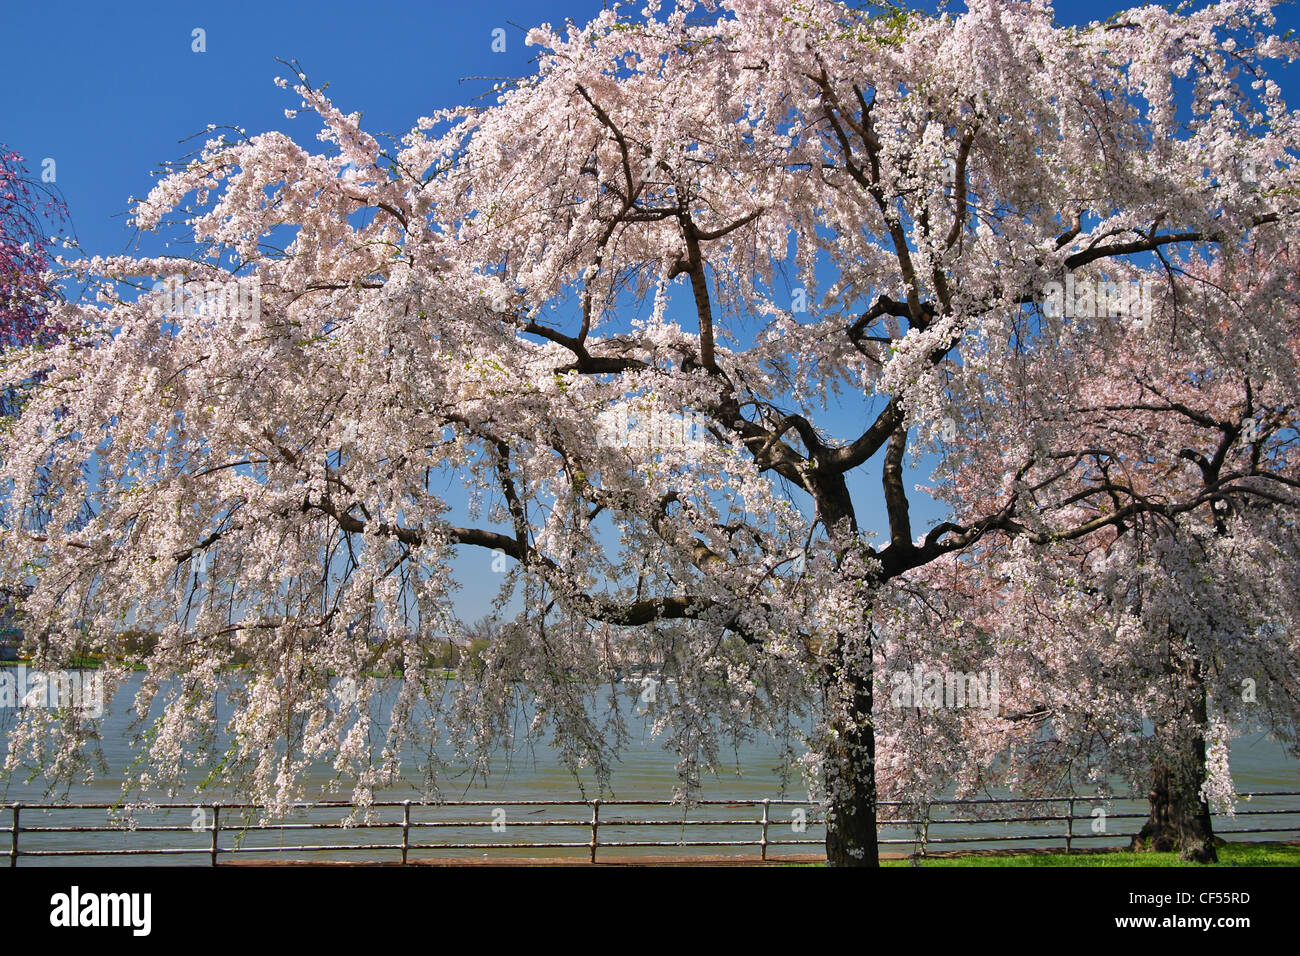 Blooming Japanese cherry blossoms on the east bank of the Potomac River, Washington, DC. Stock Photo